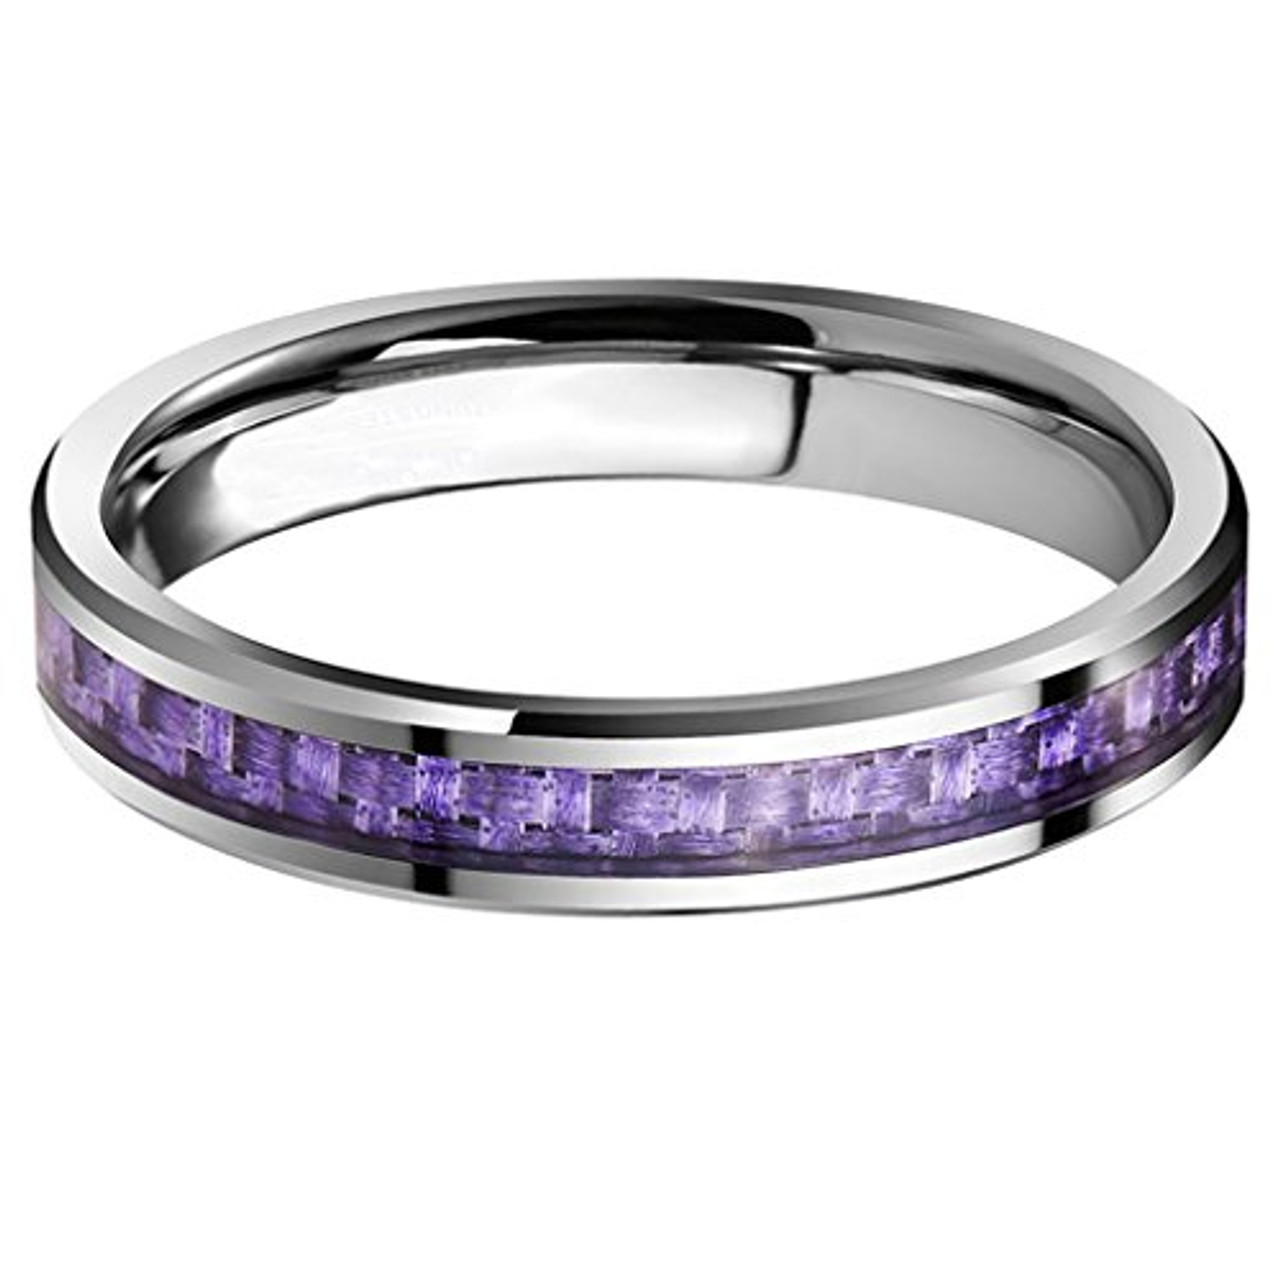 (4mm)  Women's Tungsten Carbide Wedding ring band. Purple Carbon Fiber Inlay Wedding ring bands Ring Comfort Fit